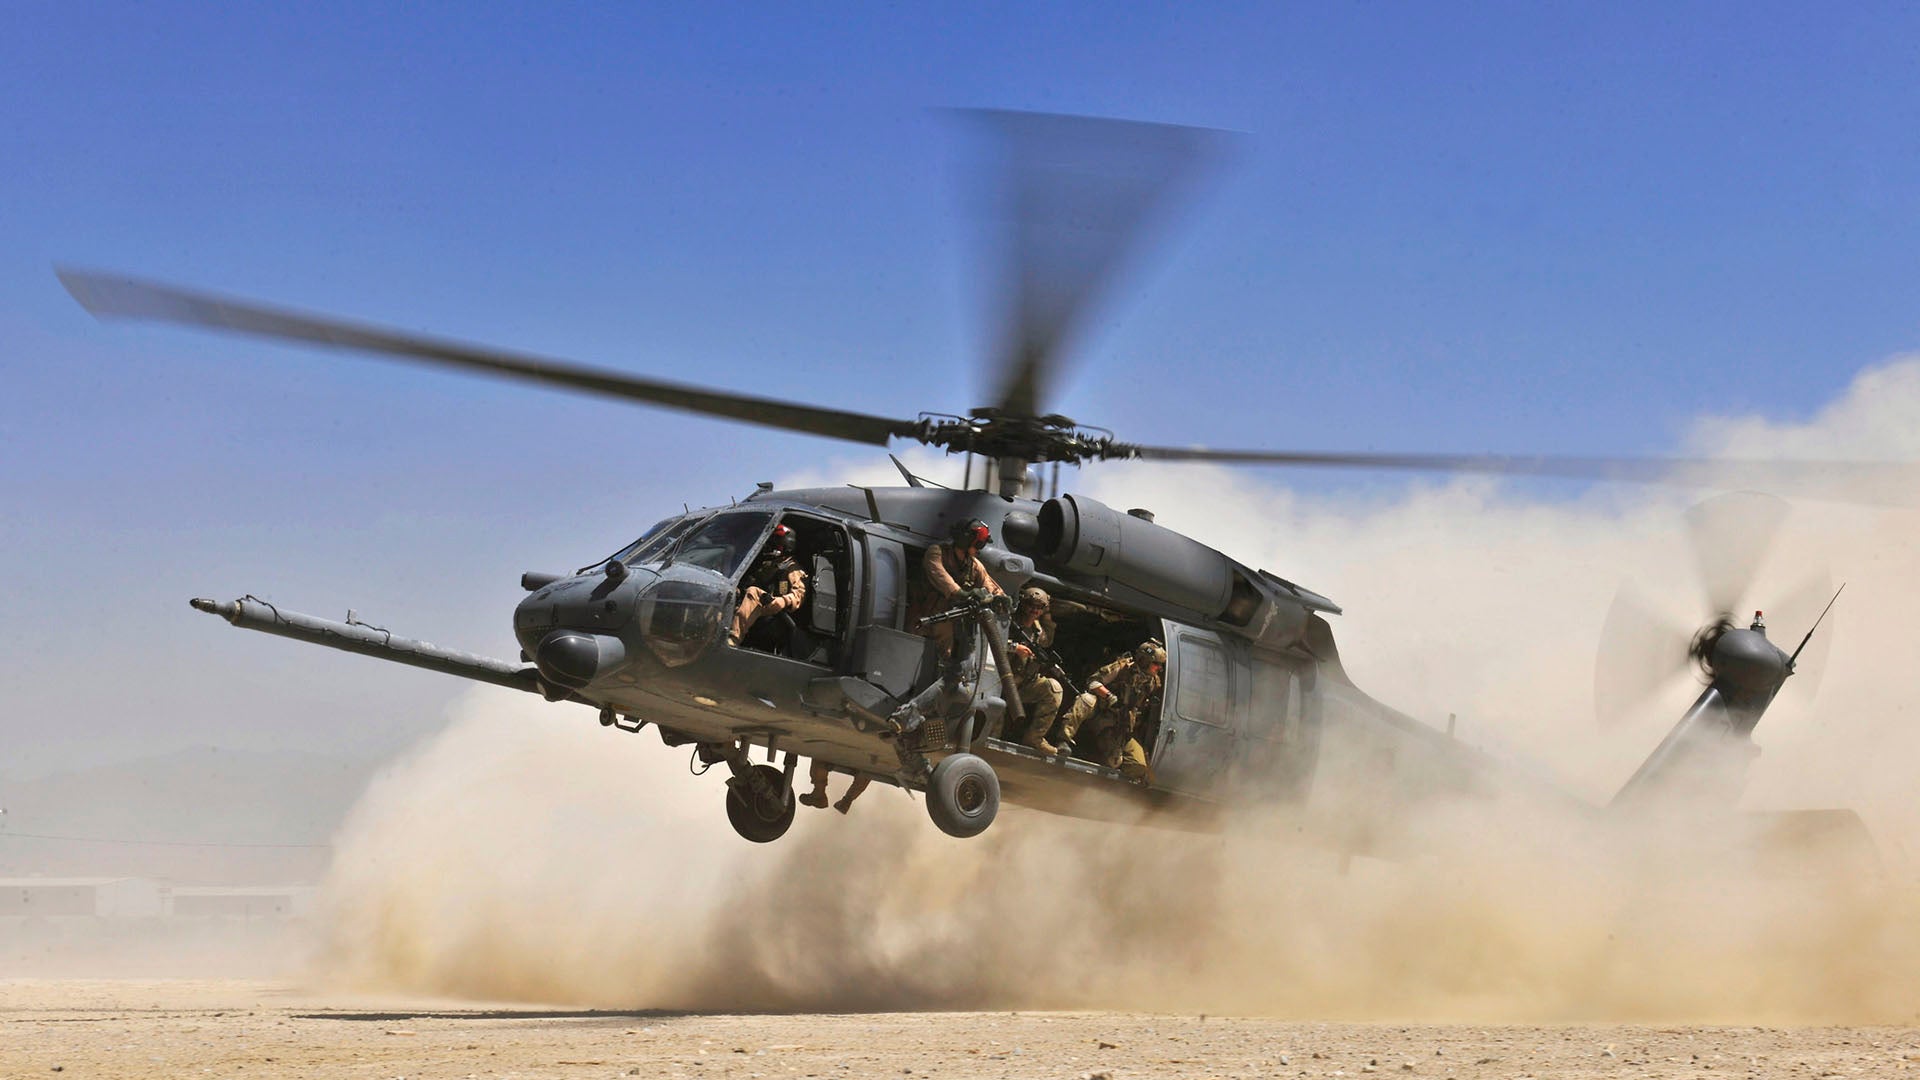 An HH-60G Pave Hawk helicopter carrying combat search and rescue Airmen approaches a landing zone during an exercise at Bagram Airfield, Afghanistan, Aug. 21. 2010. The exercise tested the rescue squadron’s ability to provide medical aid to U.S. and coalition forces. (U.S. Air Force photo/Staff Sgt. Christopher Boitz)